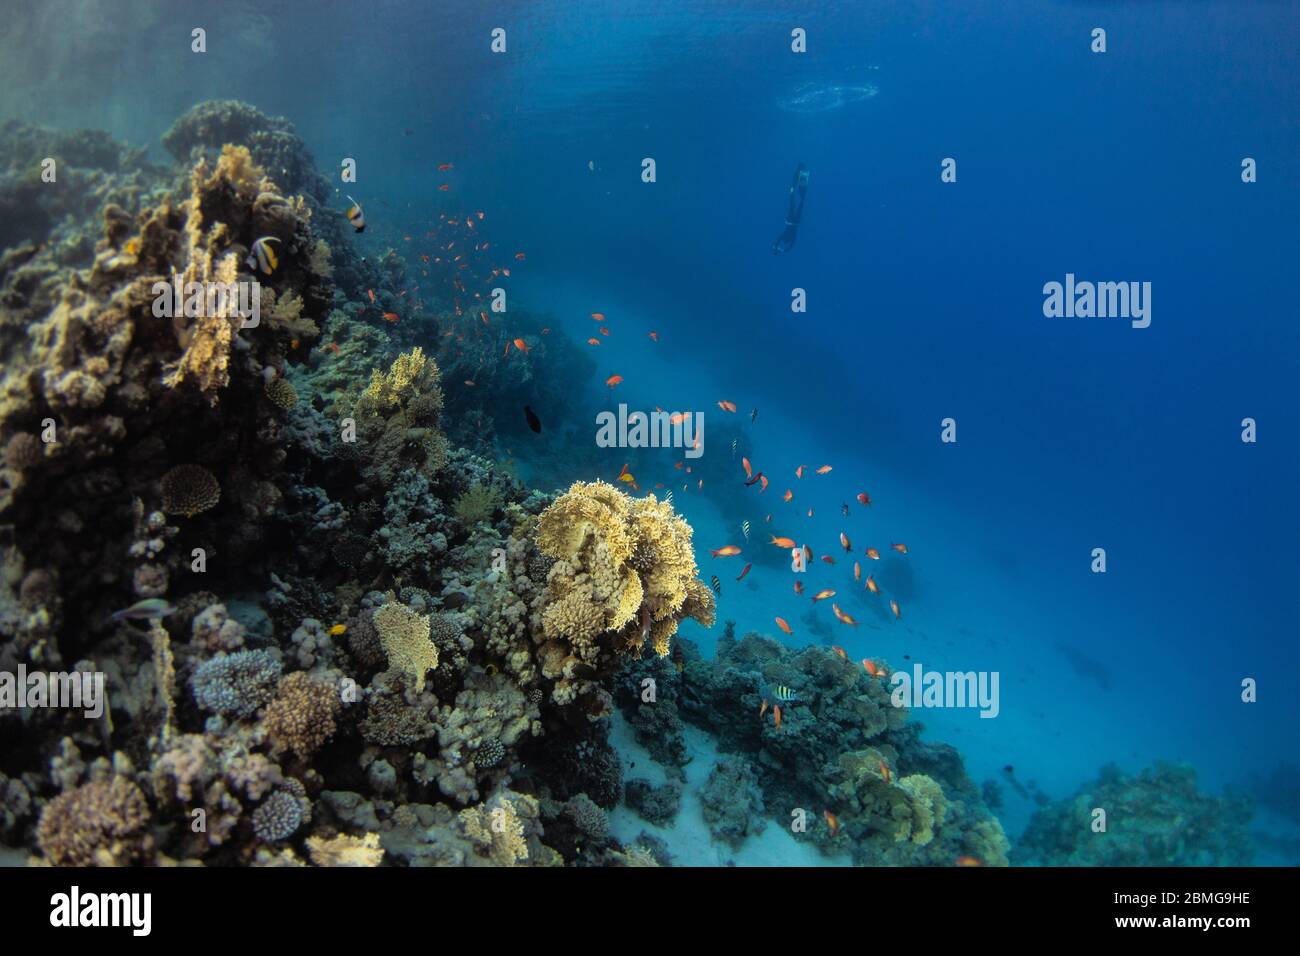 Coral reef formation in the blue water of the Red Sea Stock Photo - Alamy